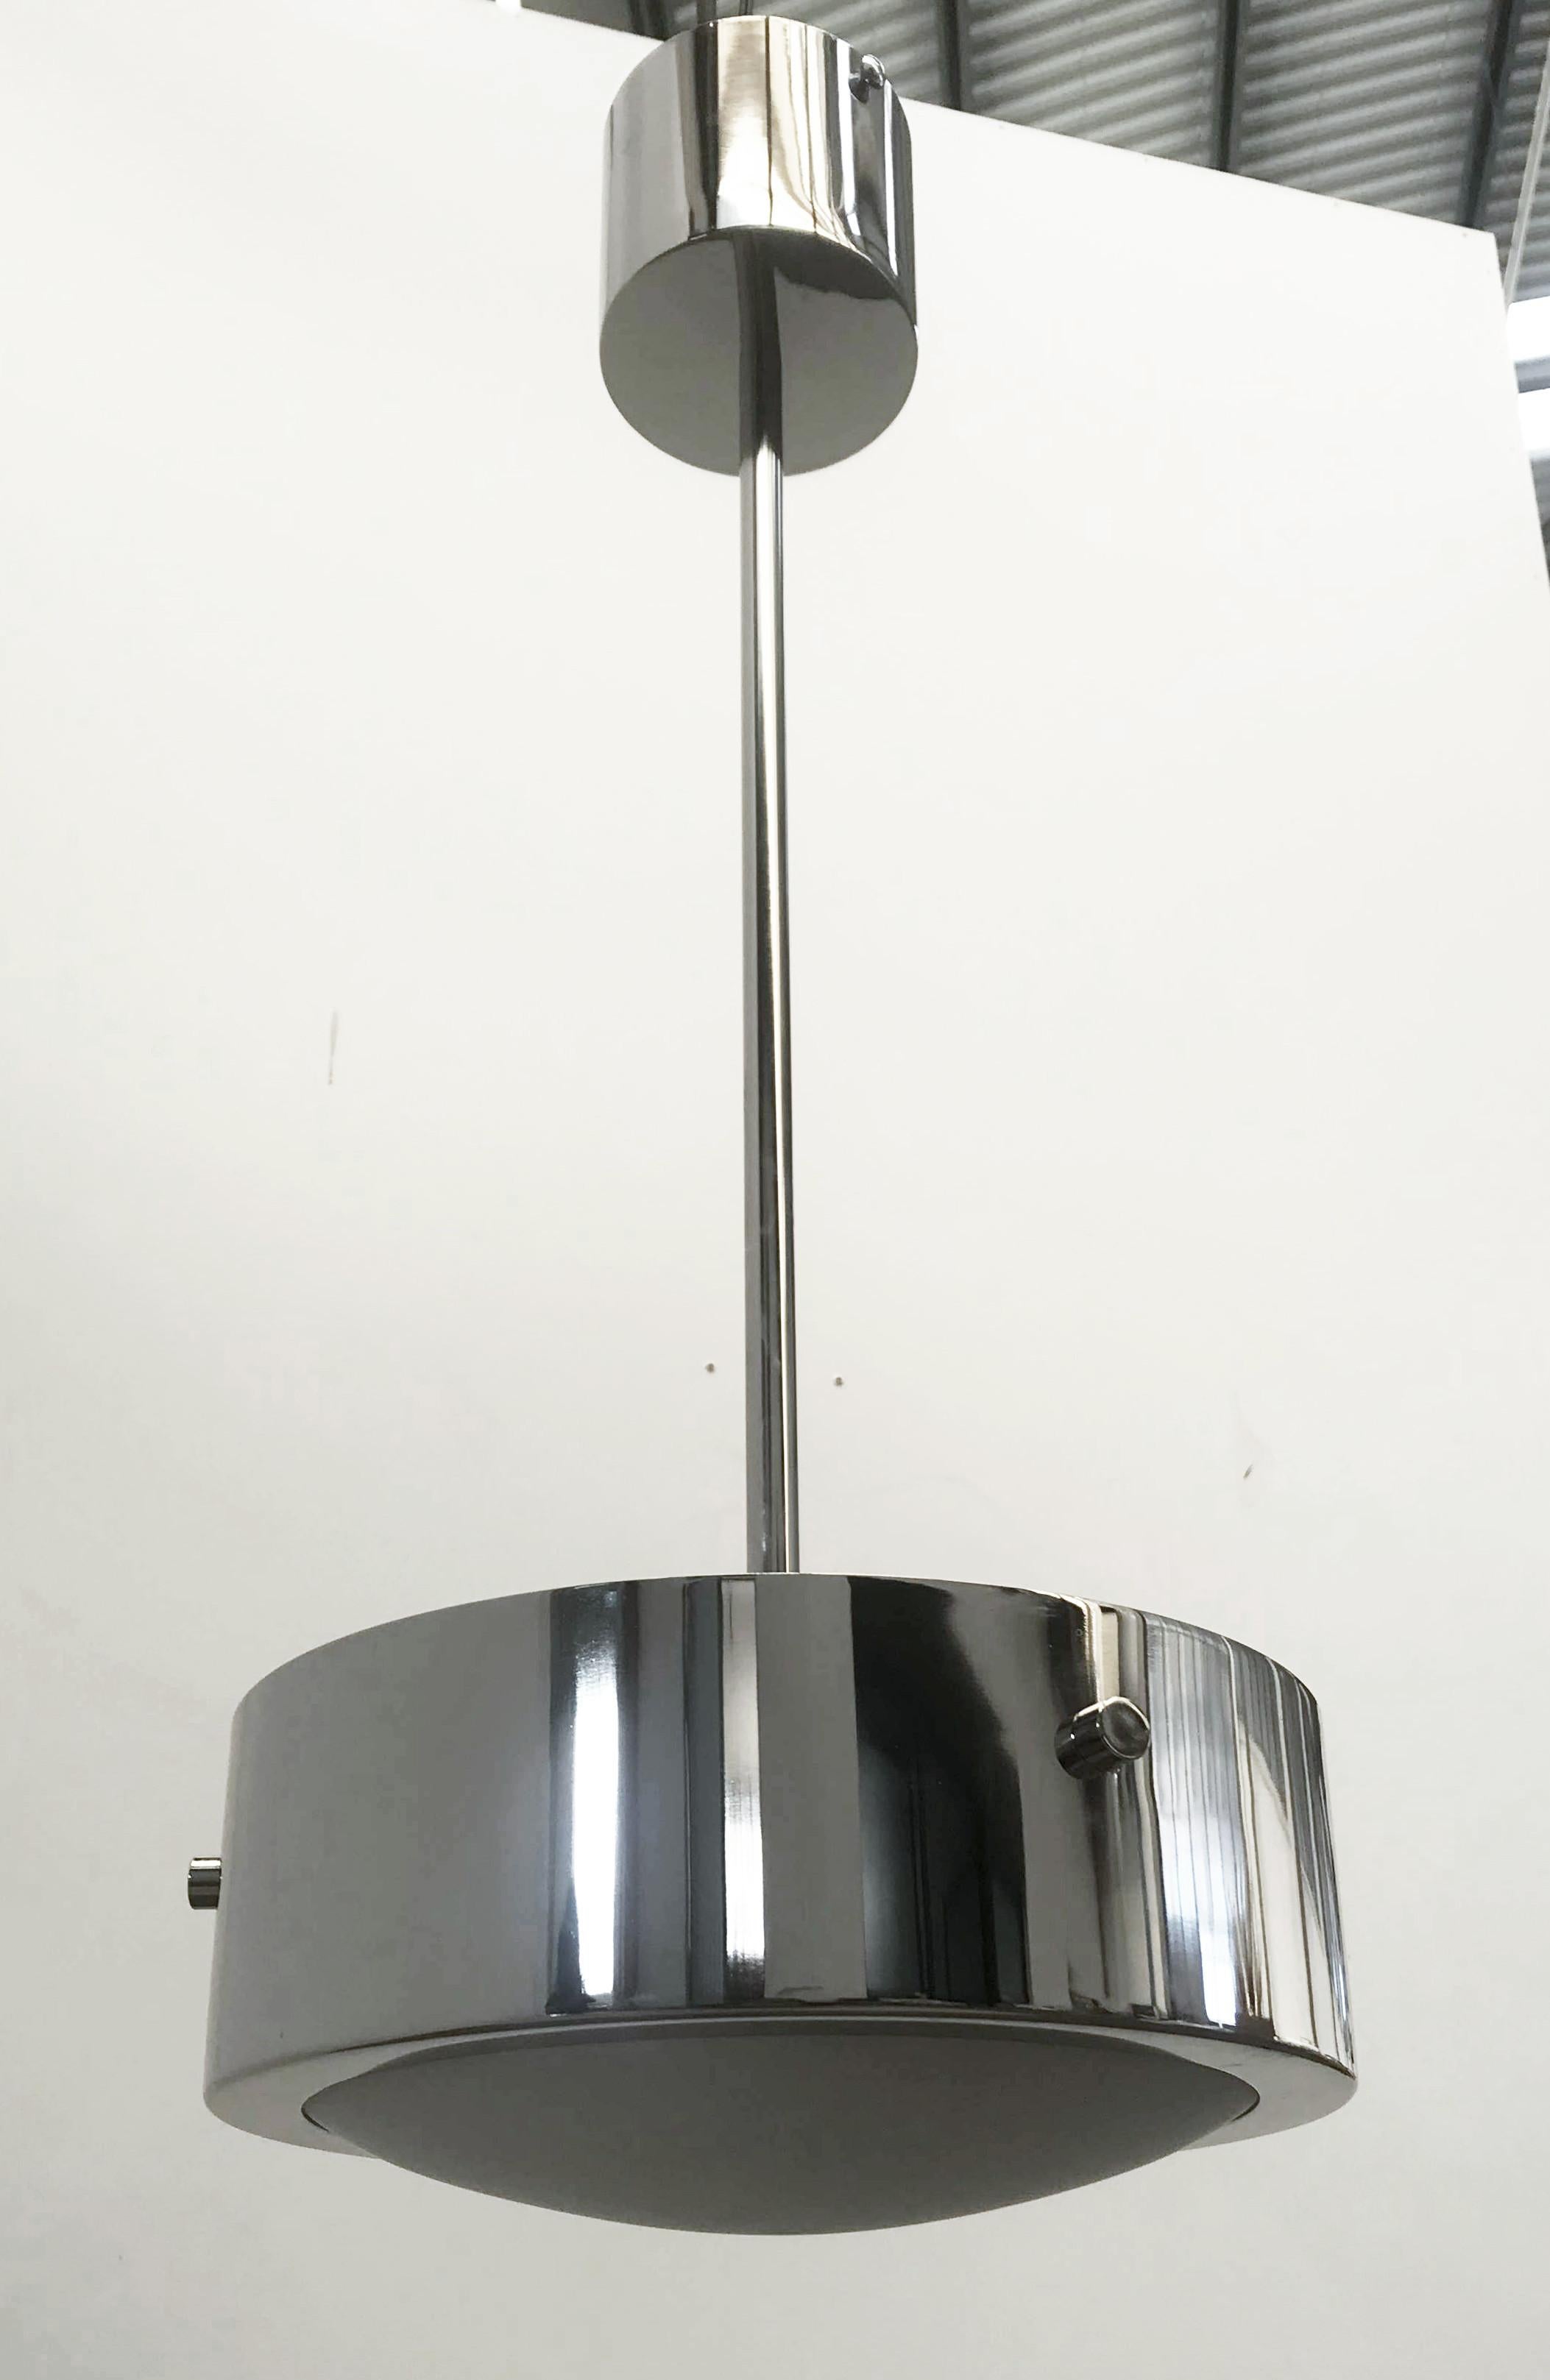 Italian pendant with Murano glass shade enclosed in metal band / Made in Italy
Designed by Fabio Ltd, inspired by Angelo Lelli and Arredoluce styles
1 light / E12 or E14 type / max 40W each
Height: 26.5 inches including rod and canopy / Diameter: 12